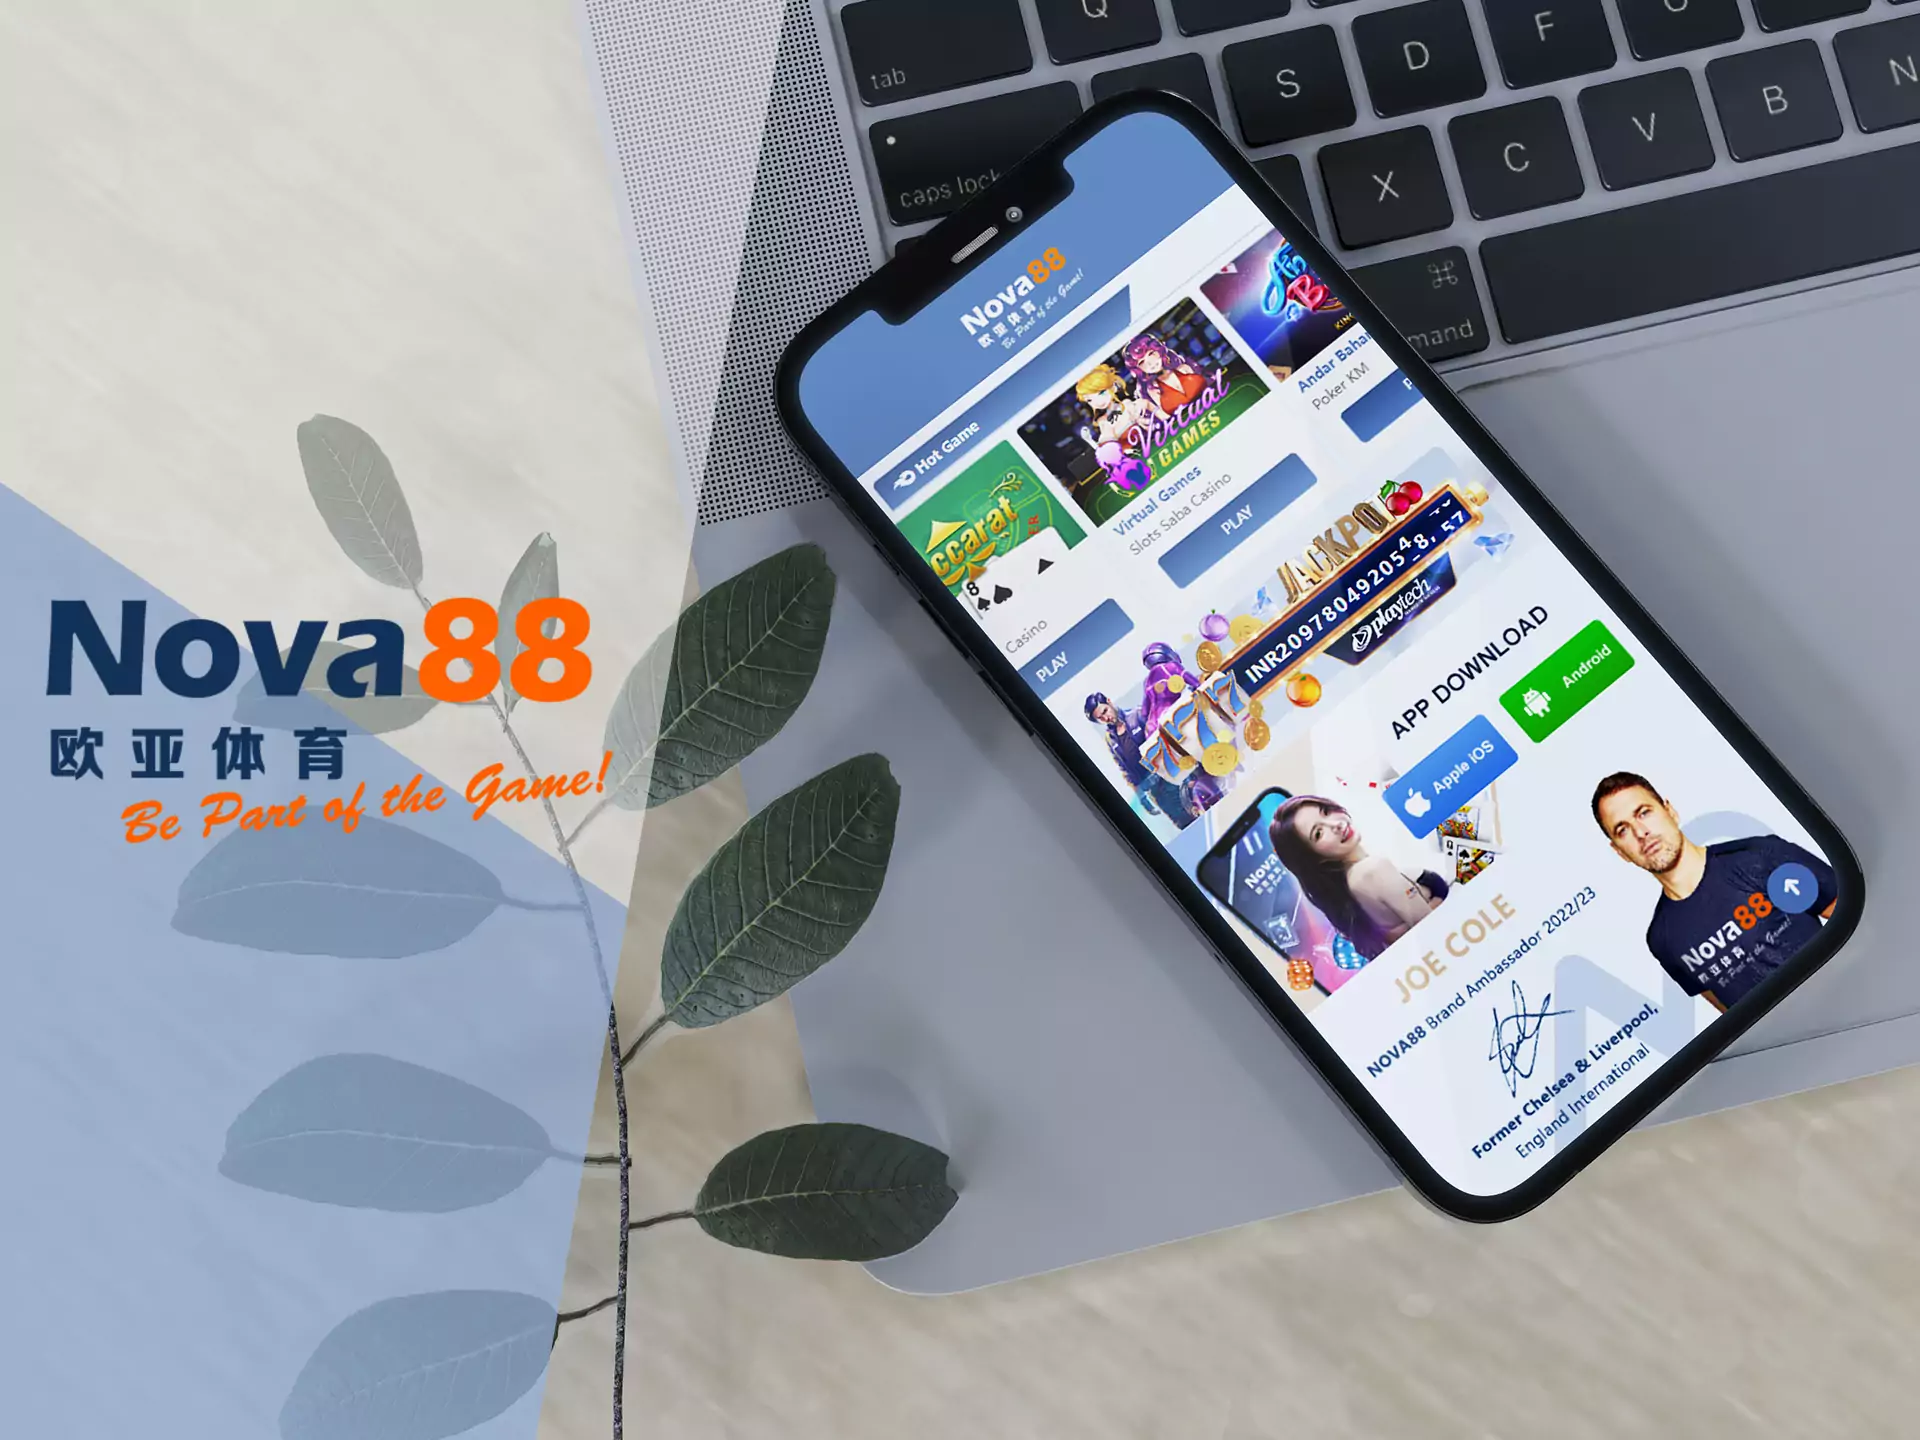 Learn more about Nova88 app features.